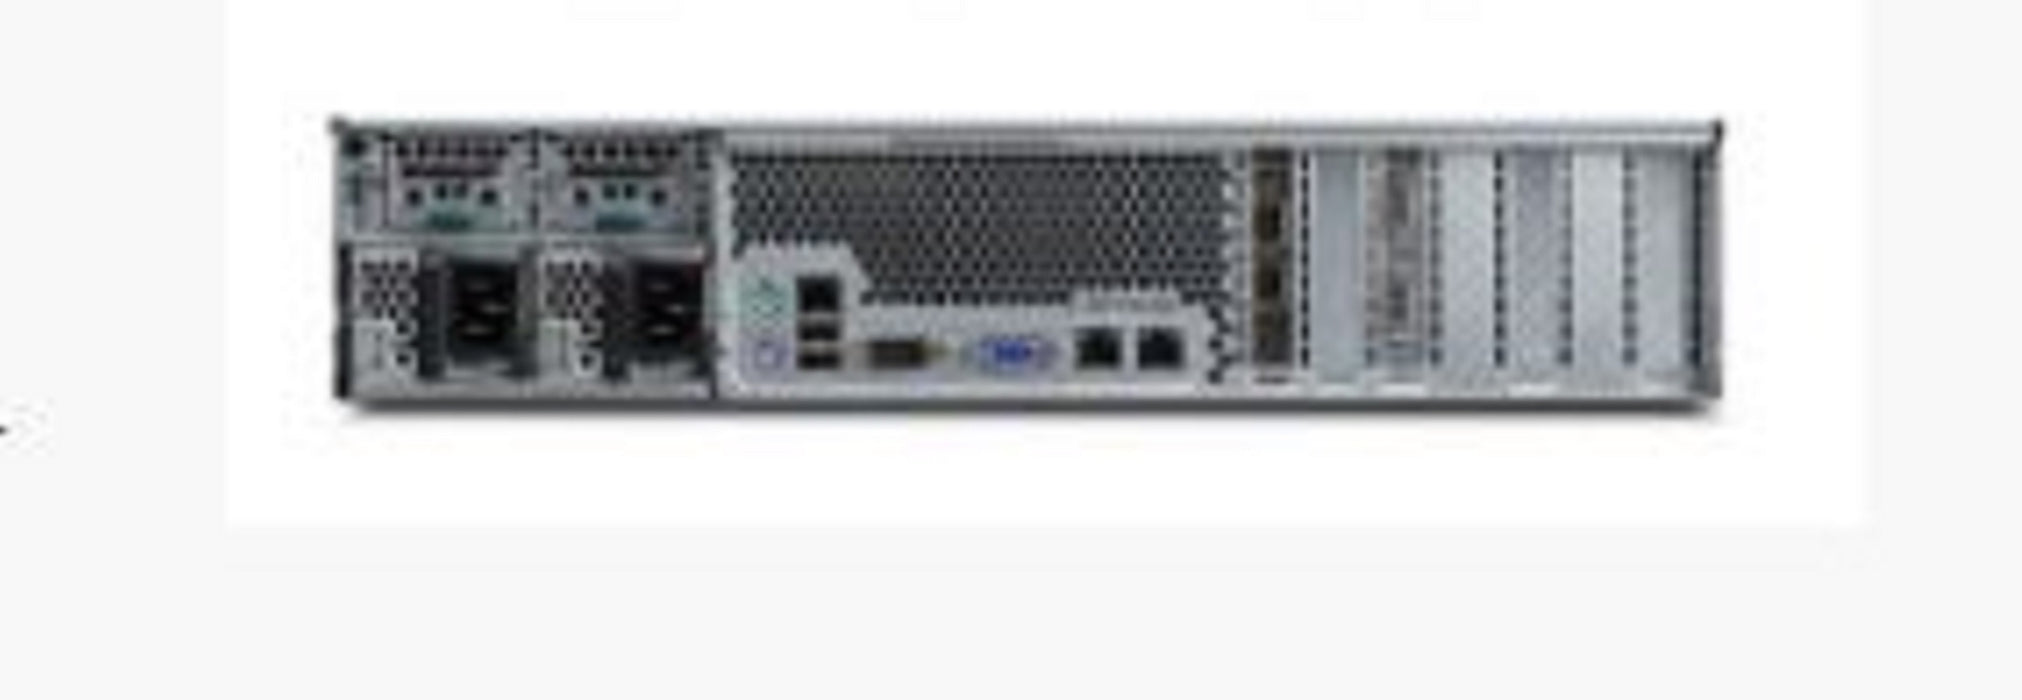 Isilon X200 36TB 6-Node Cluster with 2 x 8-Port Infiniband switches